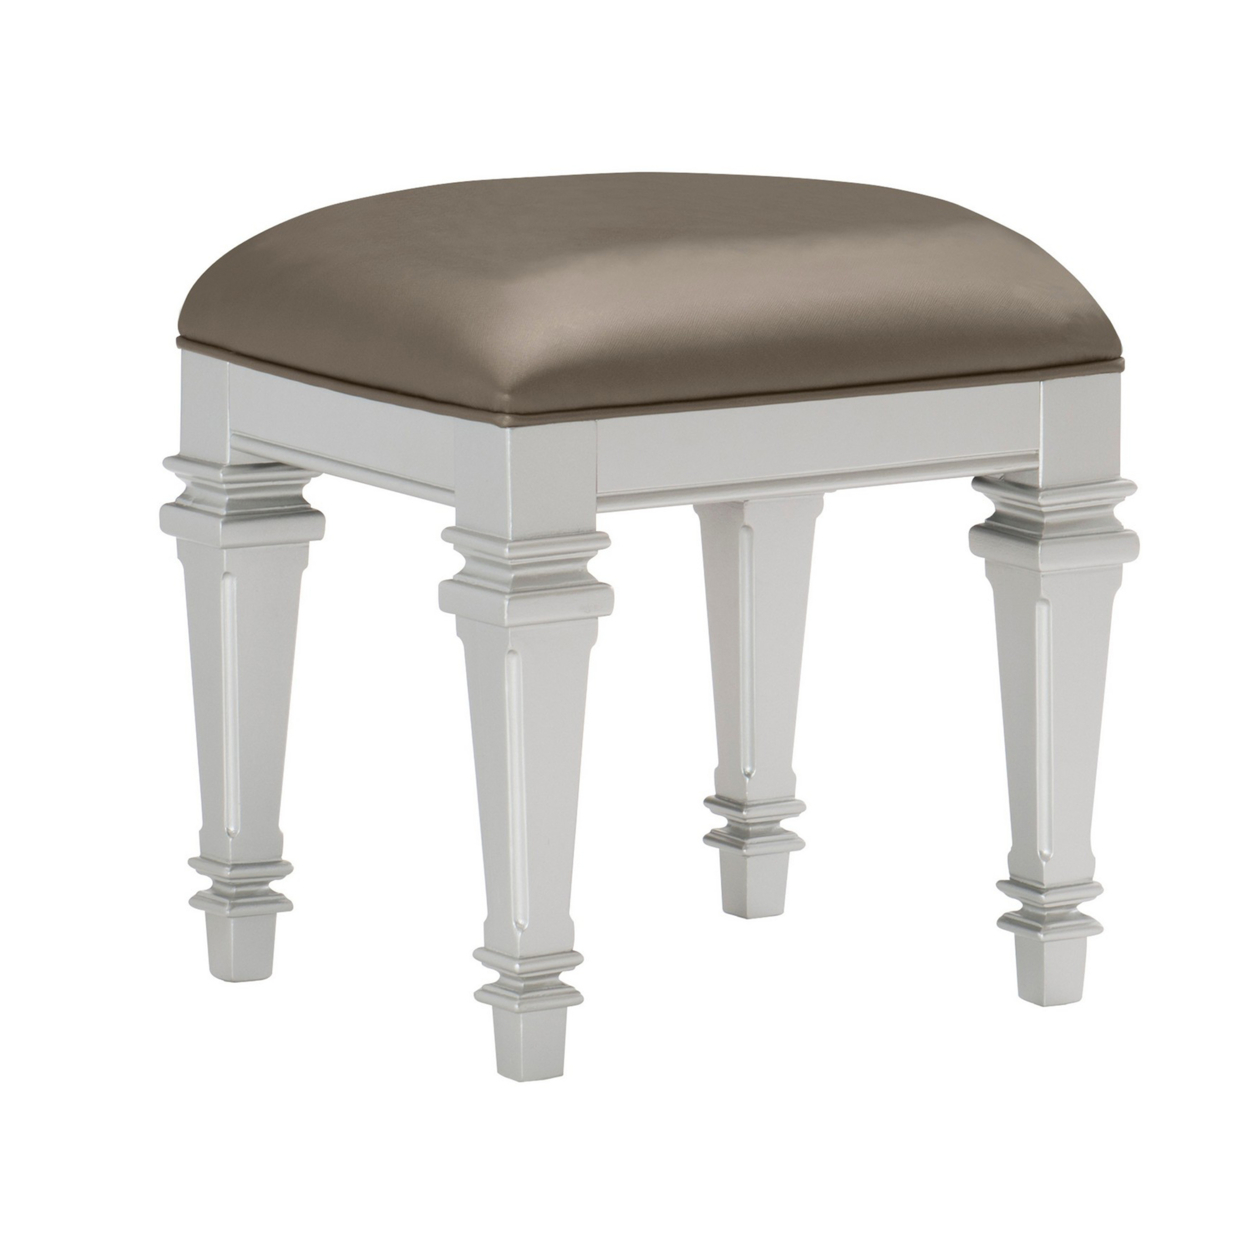 Leatherette Padded Vanity Stool With Tapered Legs And Molded Detail, Silver- Saltoro Sherpi